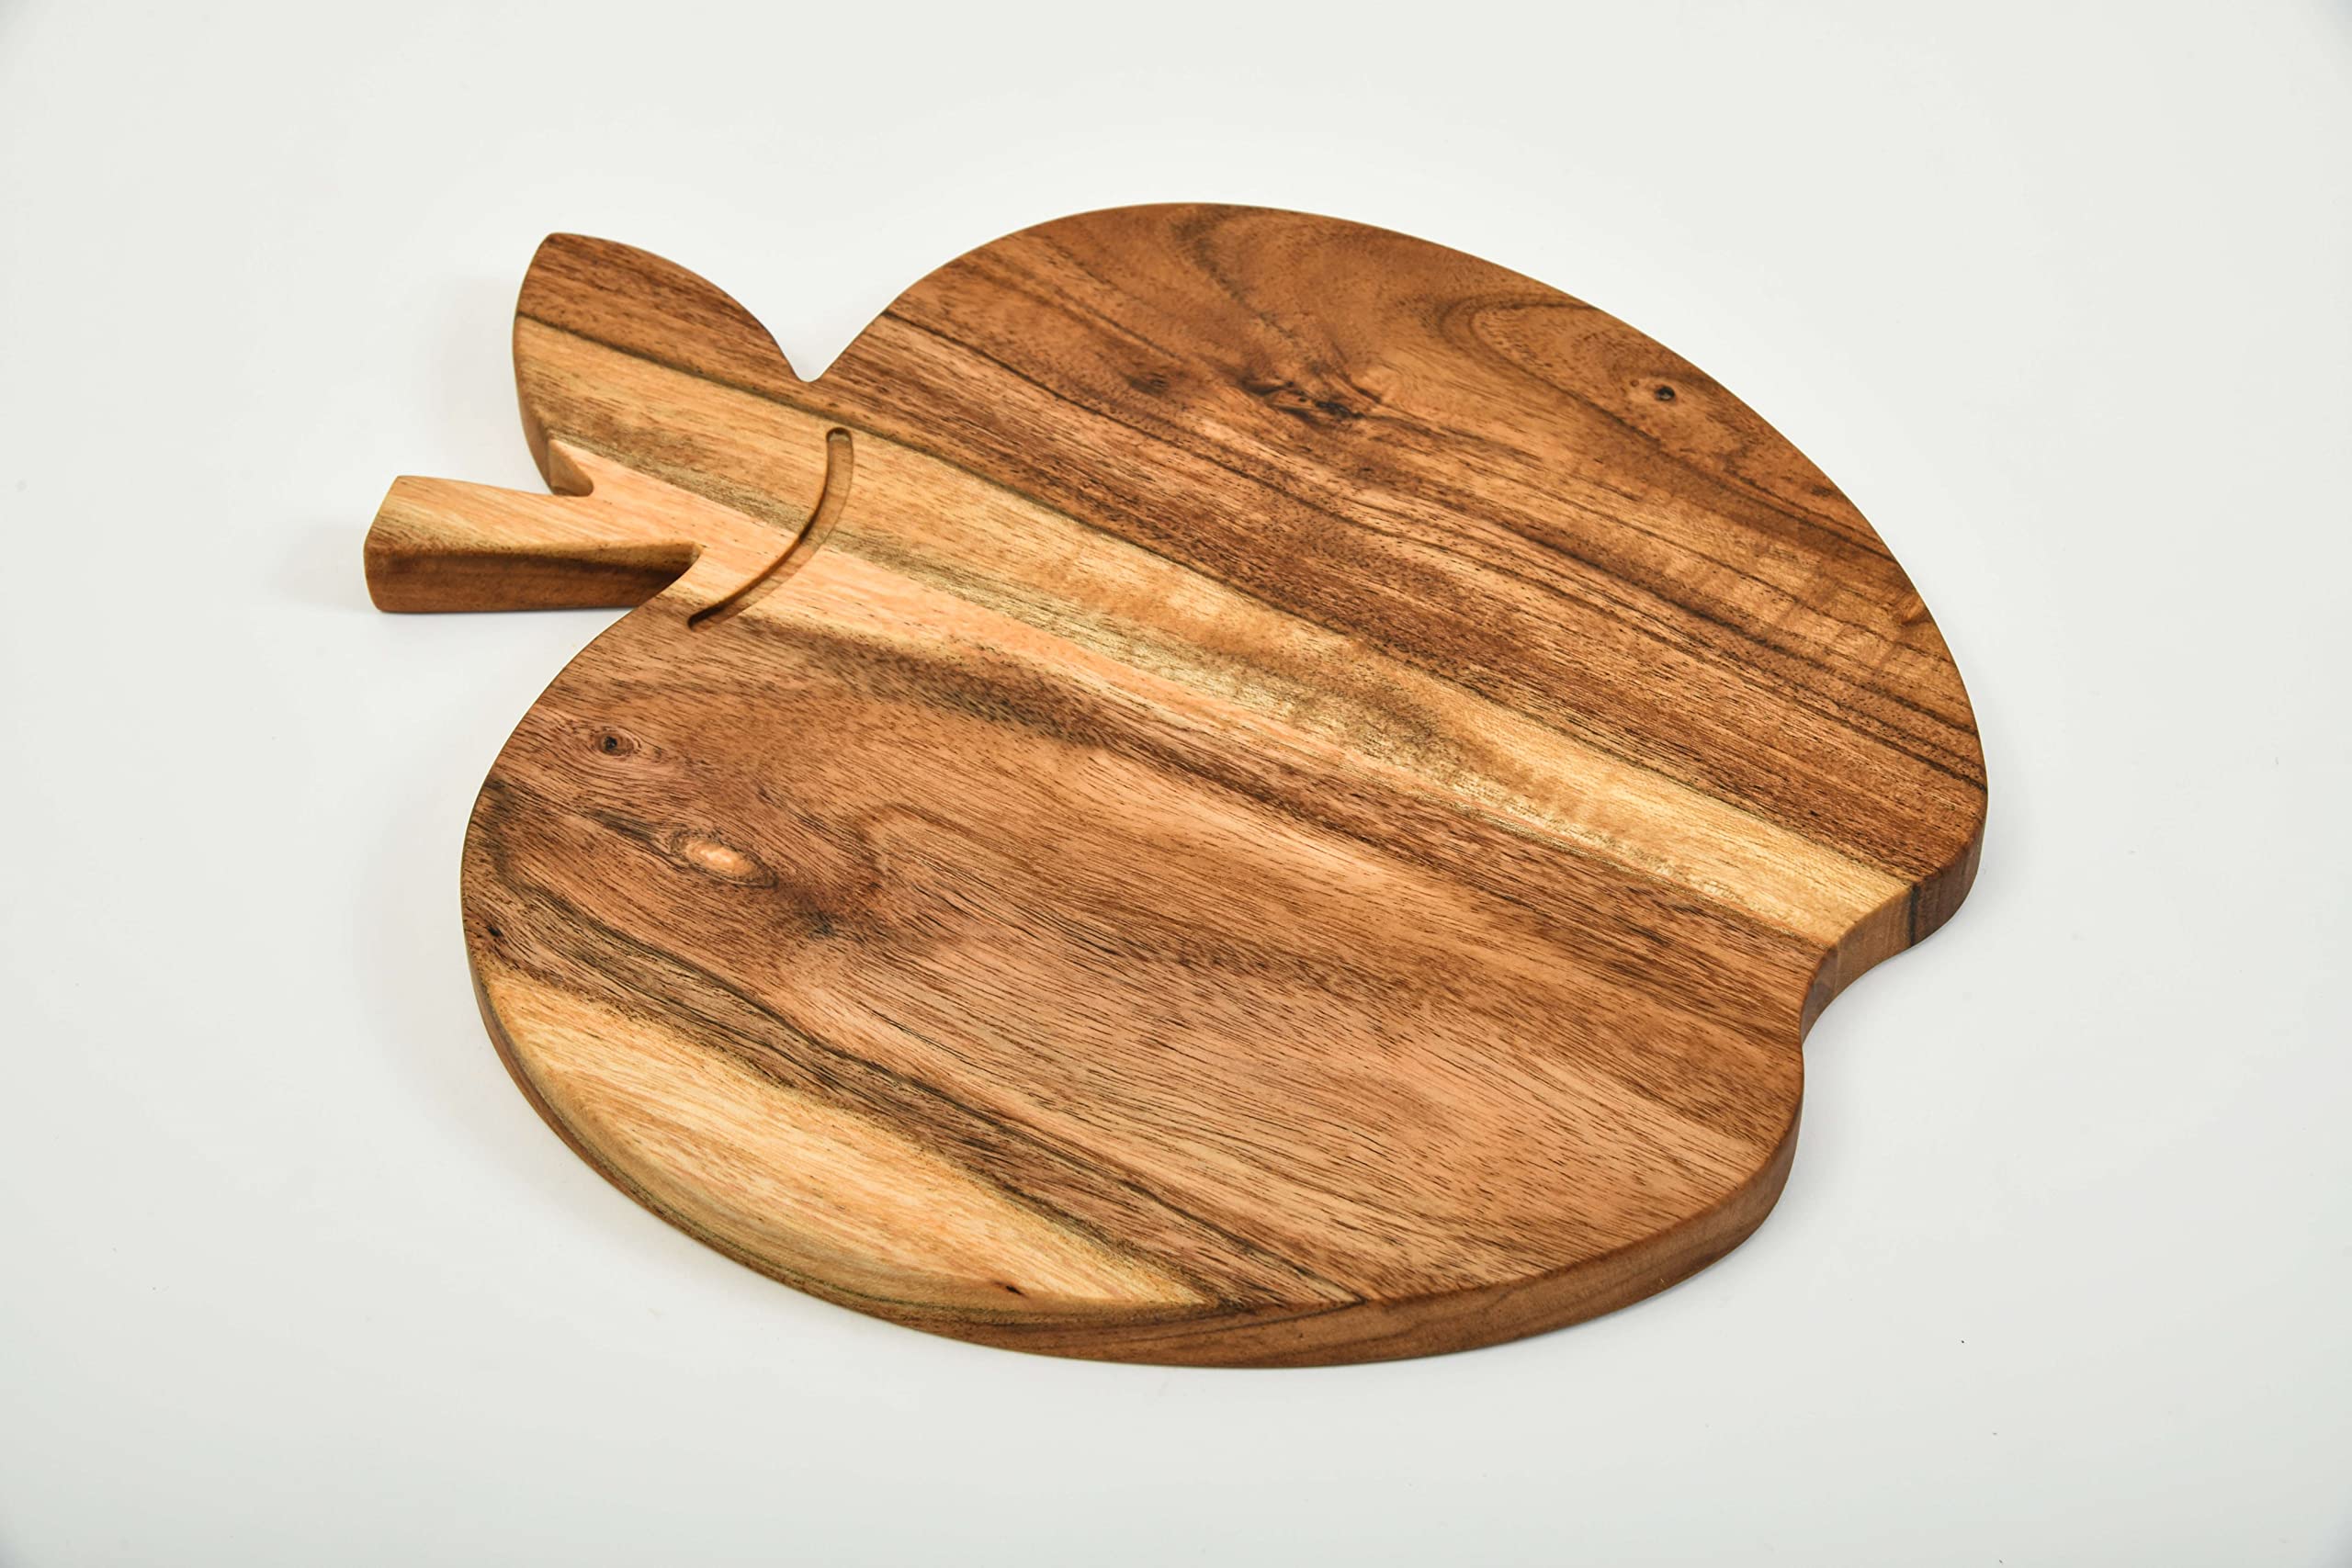 Treen Art Apple Shaped Wood Cutting Board for Kitchen, 11"L x 9"W Decorative Small Wooden Charcuterie Board and Serving Platter Boards with Handle Christmas Gift